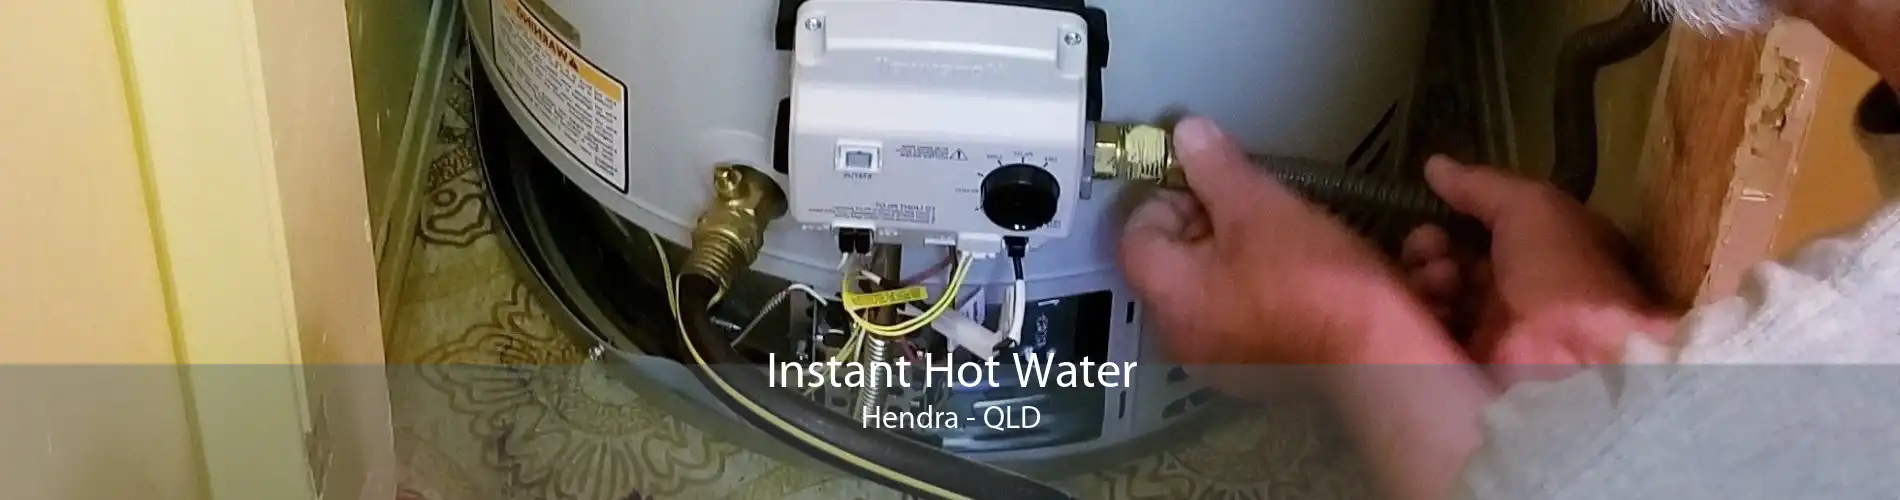 Instant Hot Water Hendra - QLD